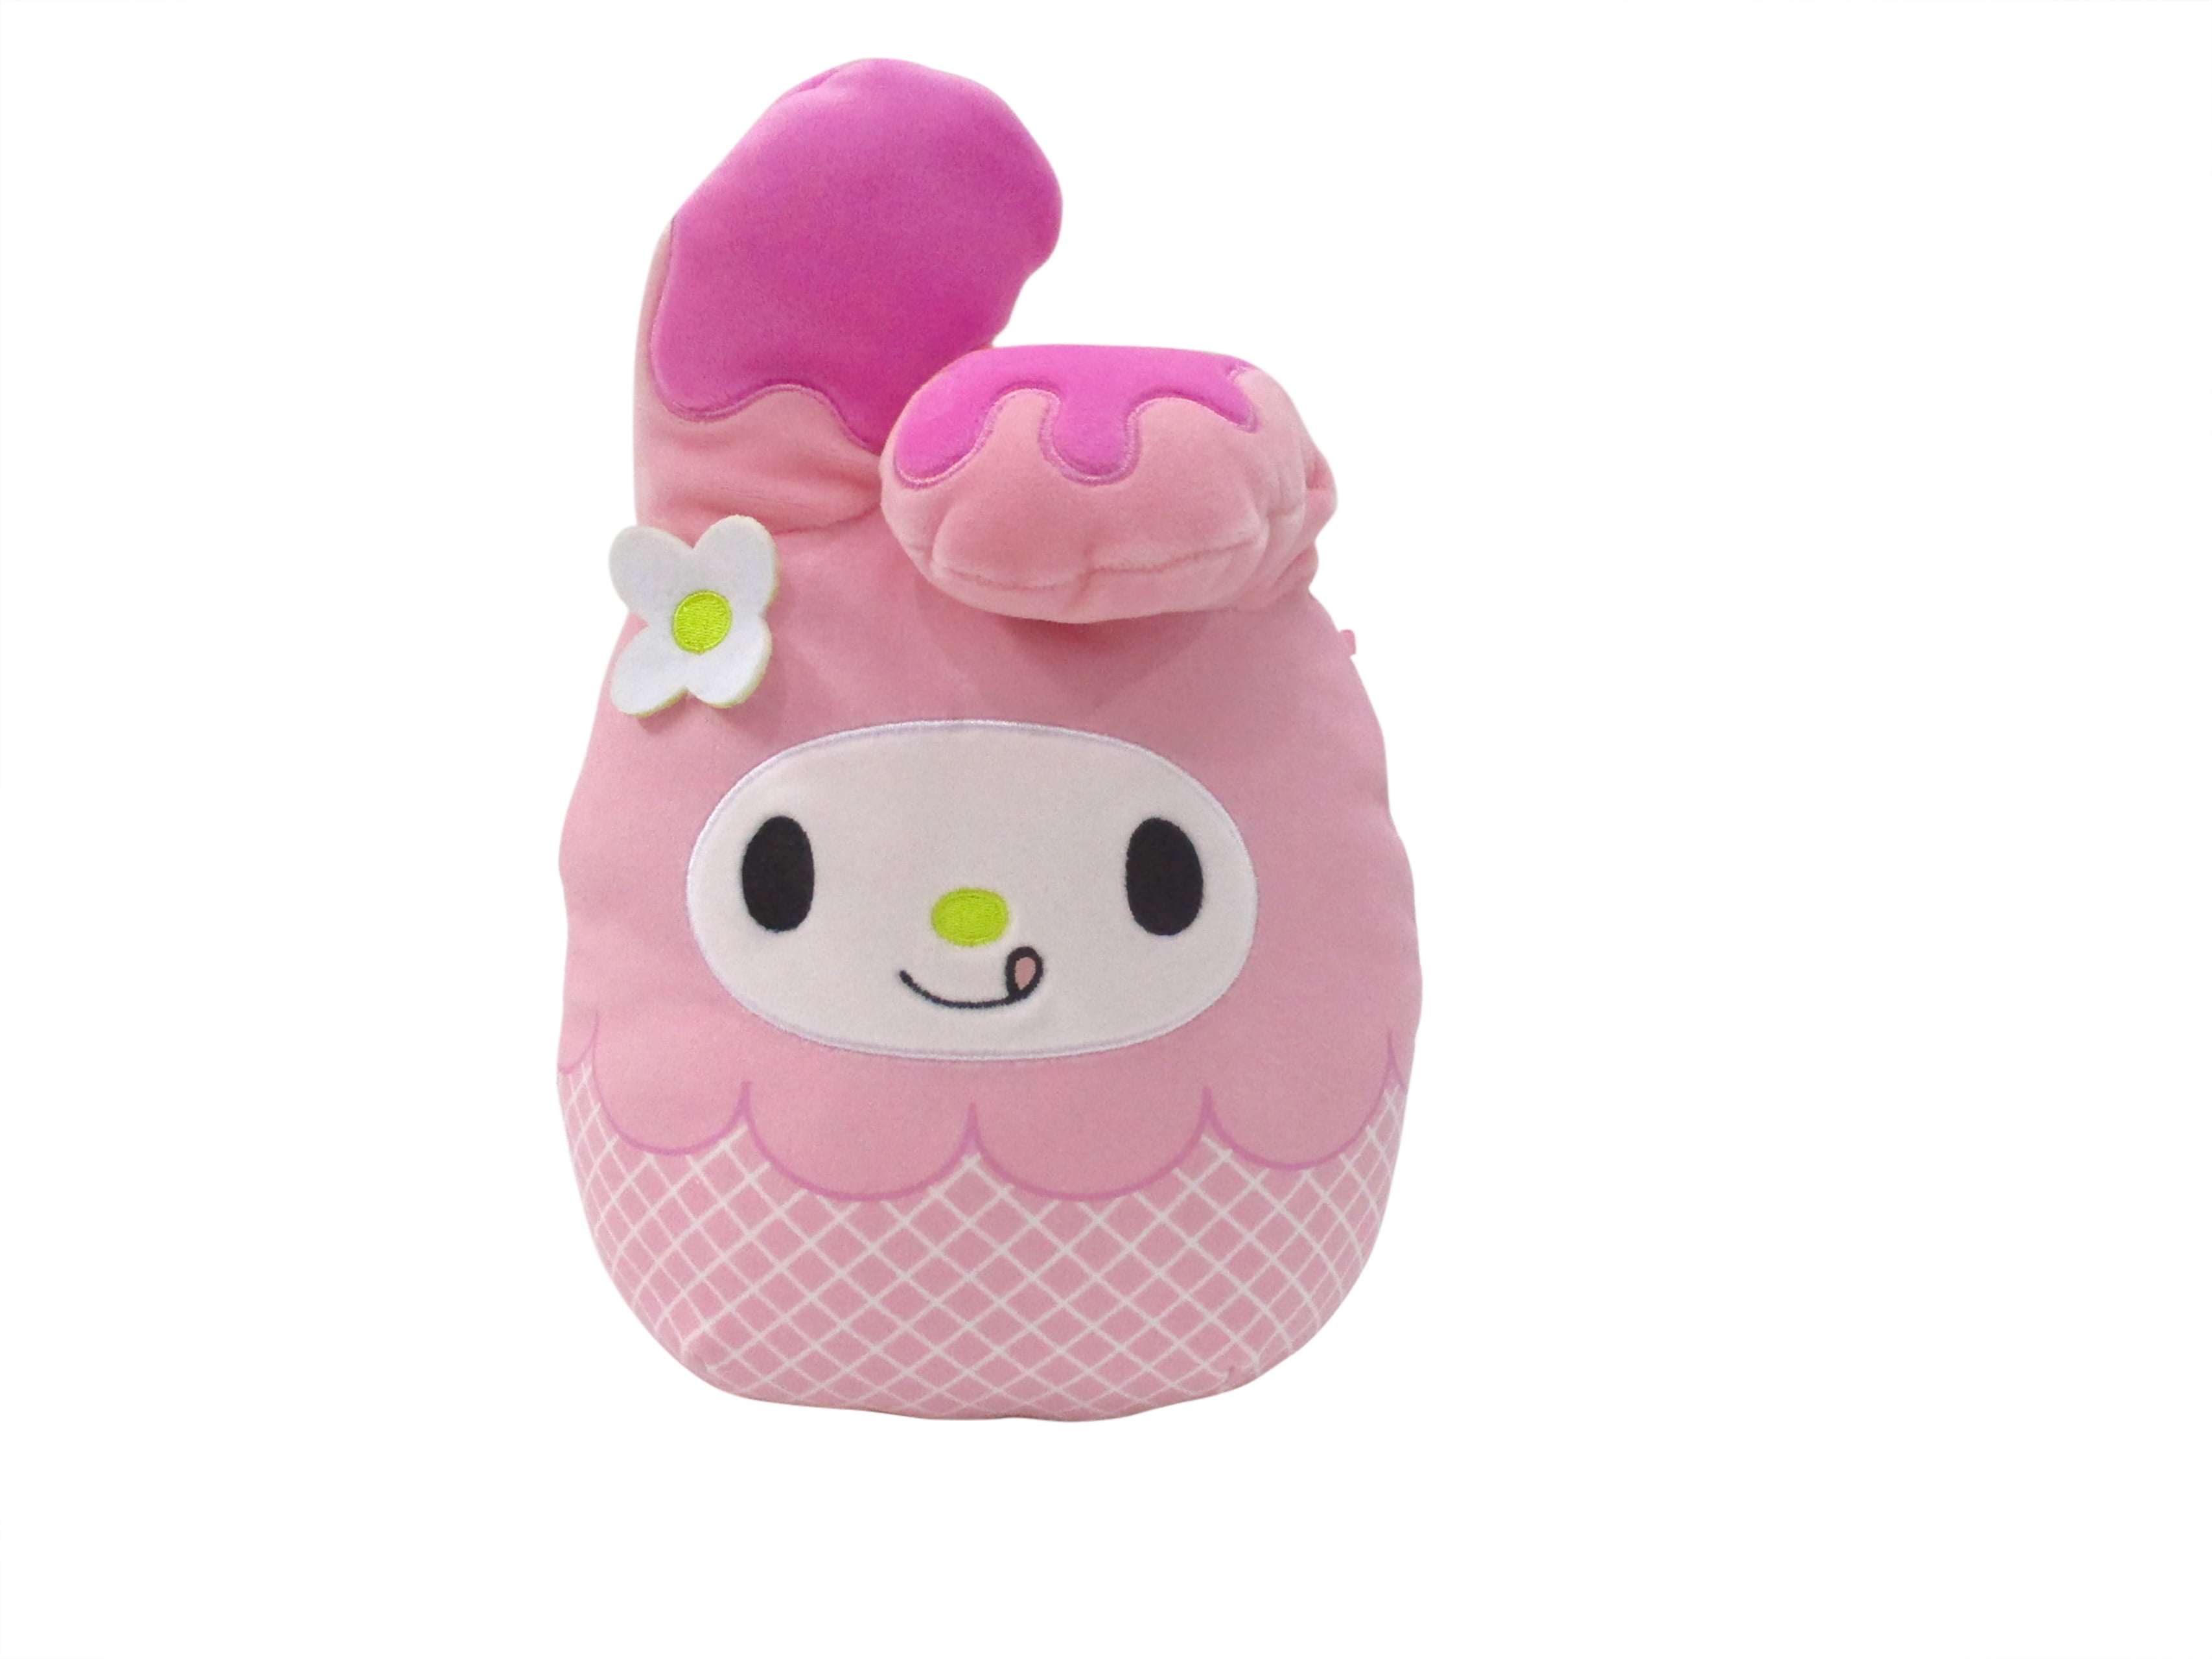 Kellytoy Squishmallow Unicorn Hello Kitty 12" With Tags for sale online